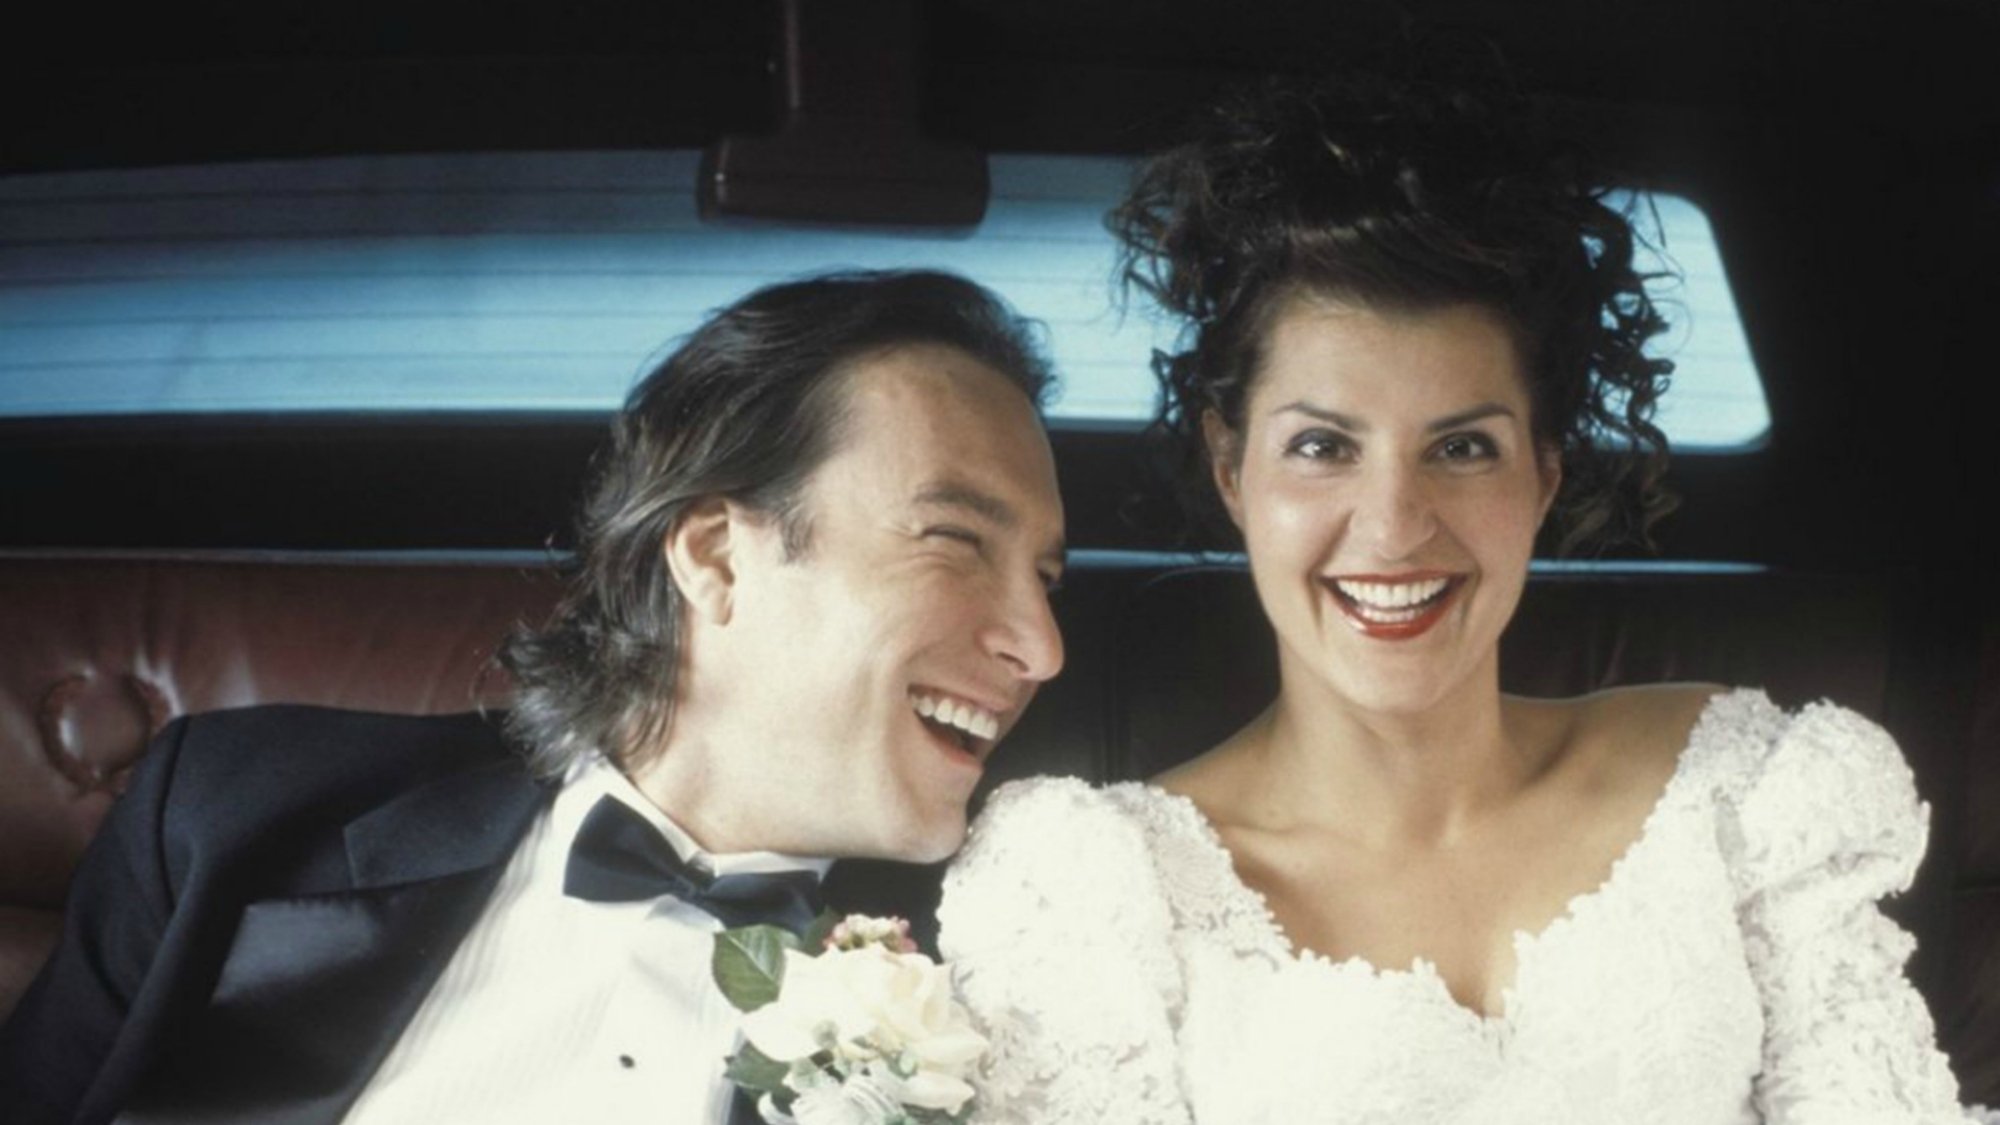 A woman in a wedding gown and a man in a tuxedo sit in the back seat of a car.